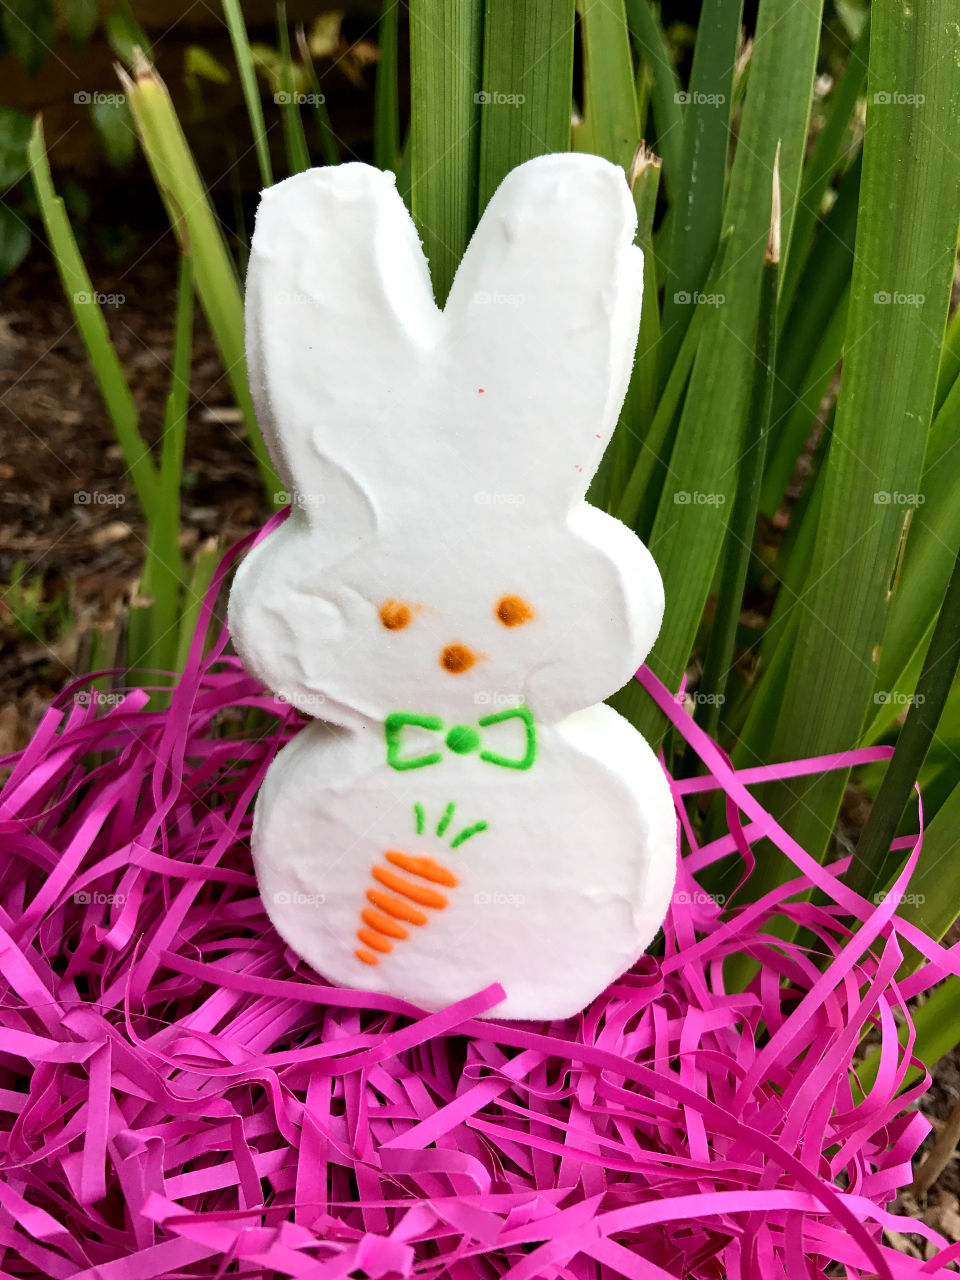 Happy Easter from Peter Rabbit, enjoy the fluffy peep!